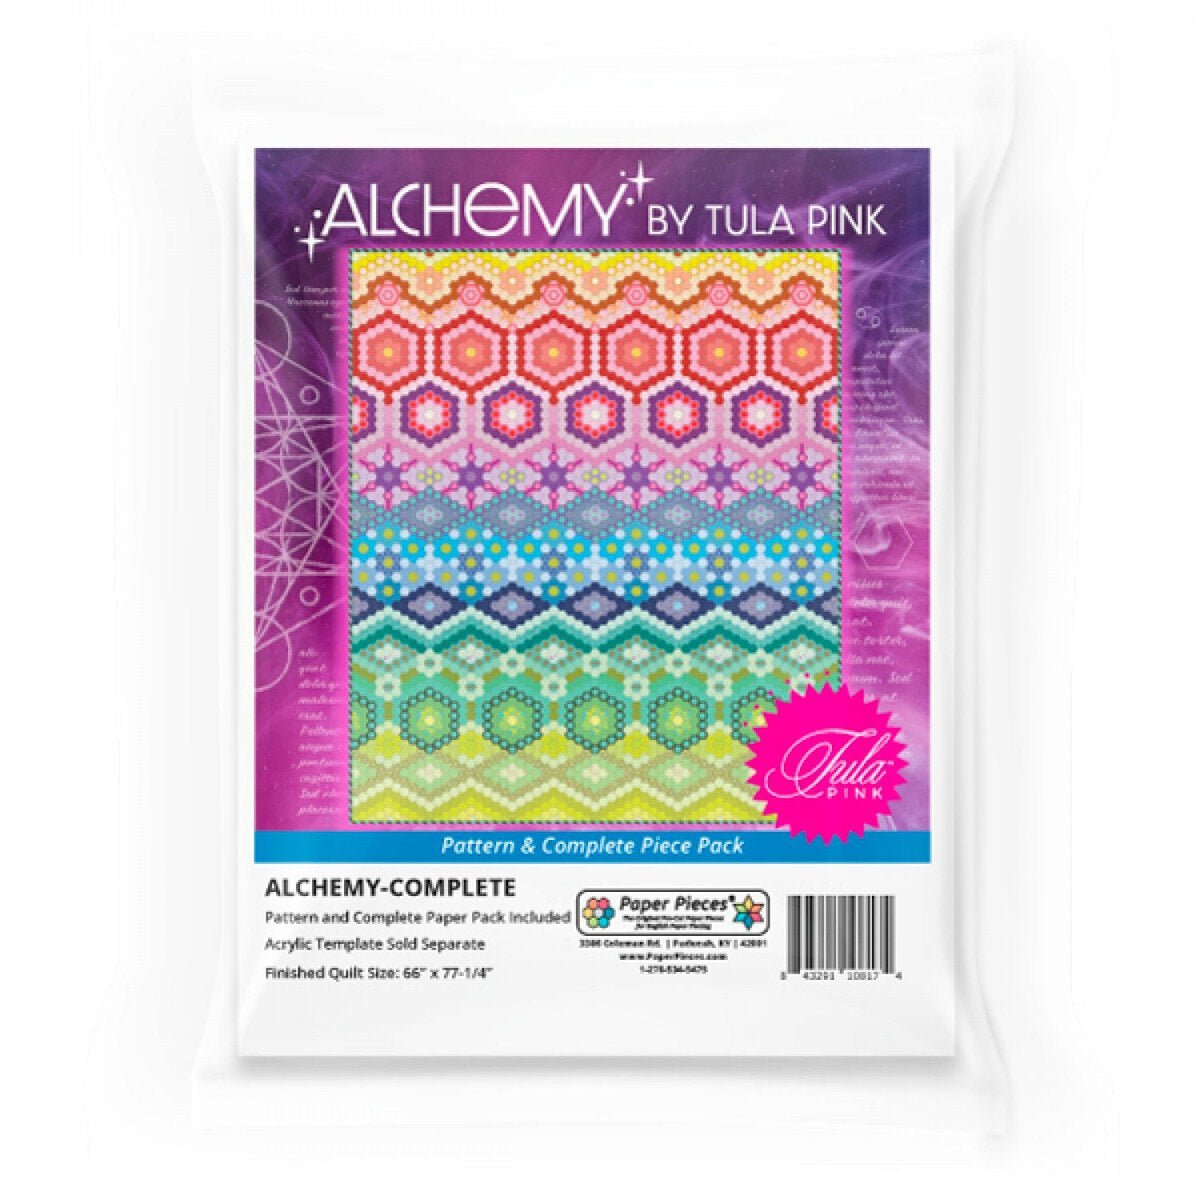 Alchemy Complete Paper Piece Pack - Includes EPP Papers -ALCHEMY-COMPLETE - Justin Fabric!